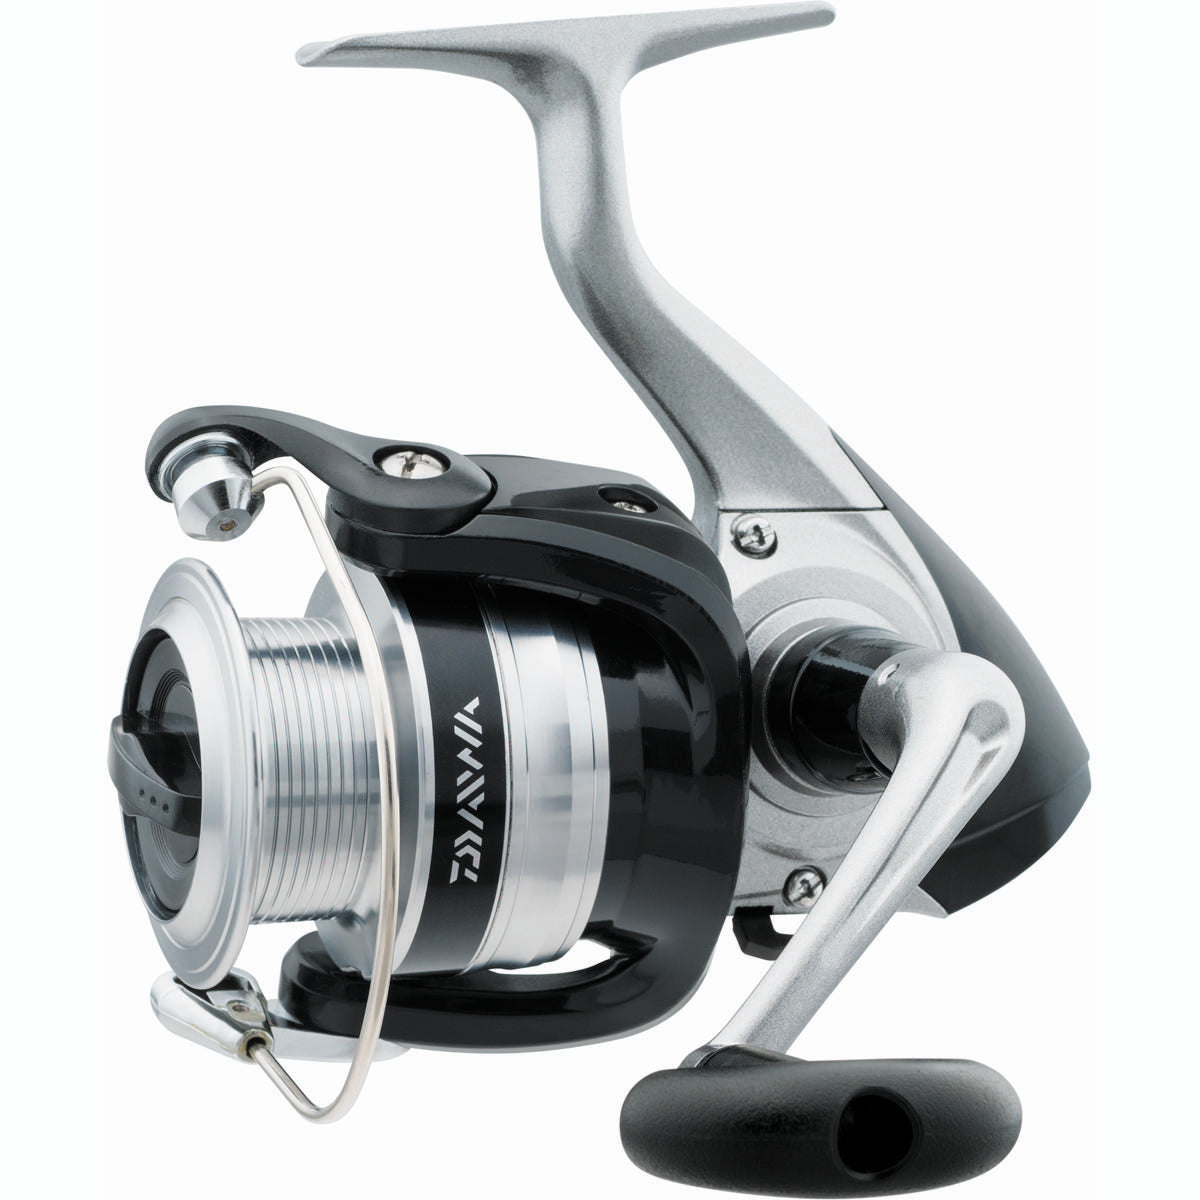 Photo of Daiwa Strikeforce-B Spinning Reel for sale at United Tackle Shops.